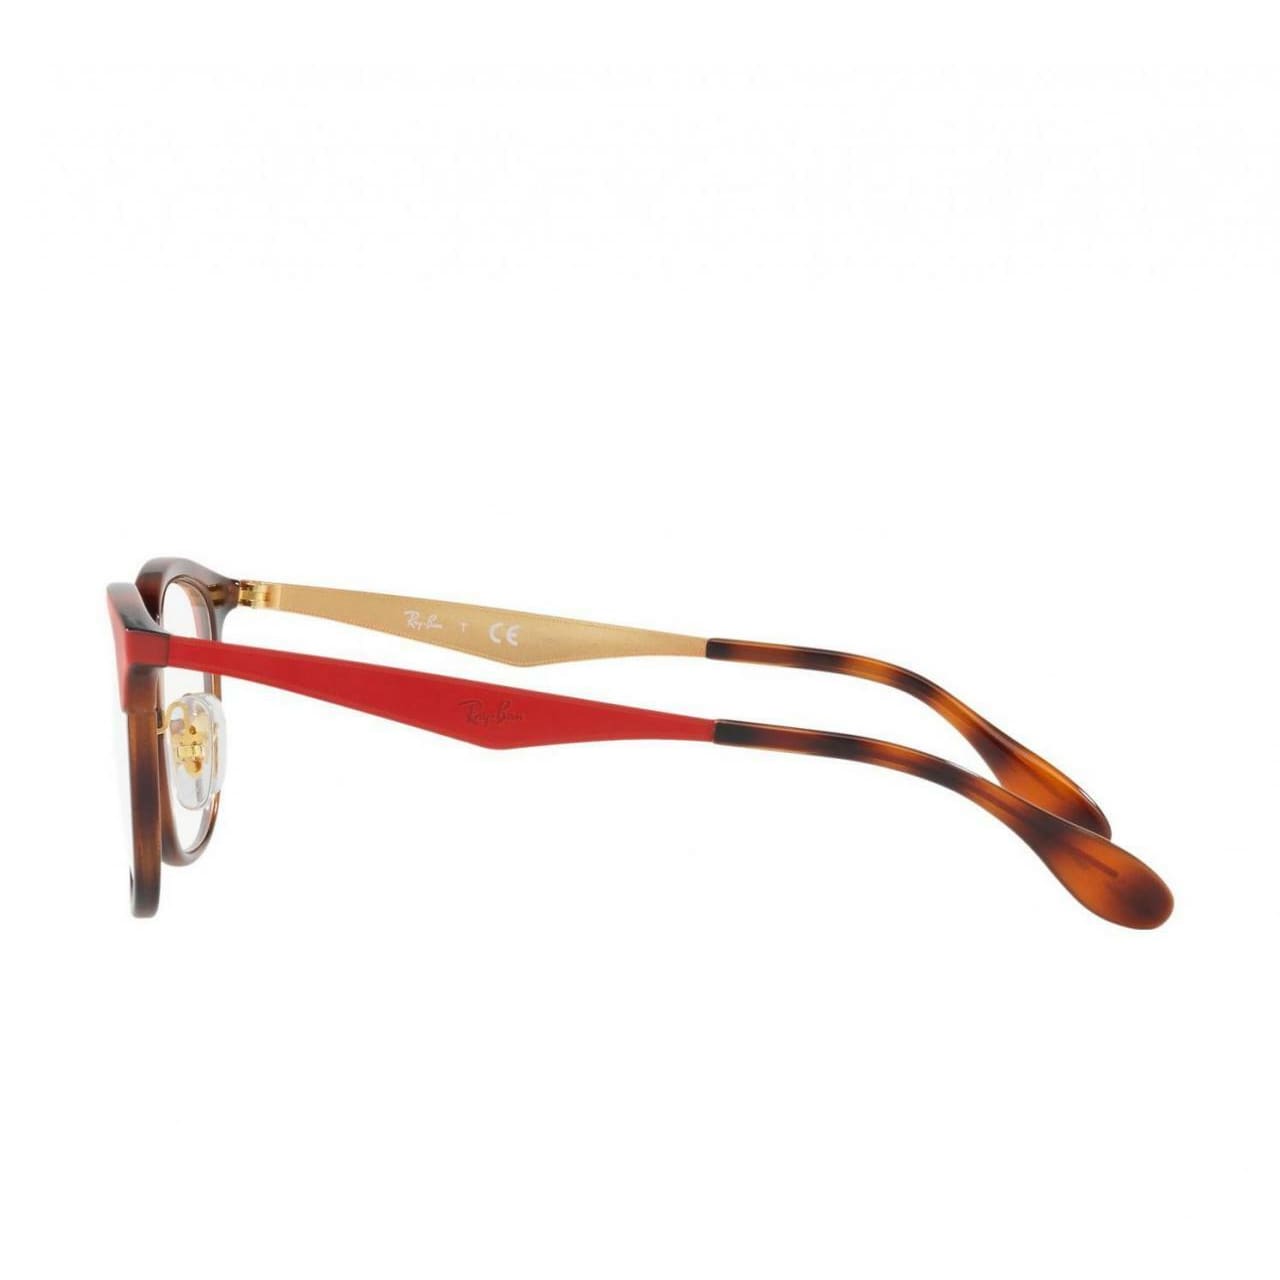 Ray-Ban RB7112-5730 Red Gold Injected Round Unisex Eyeglasses 8053672782141 8053672782141